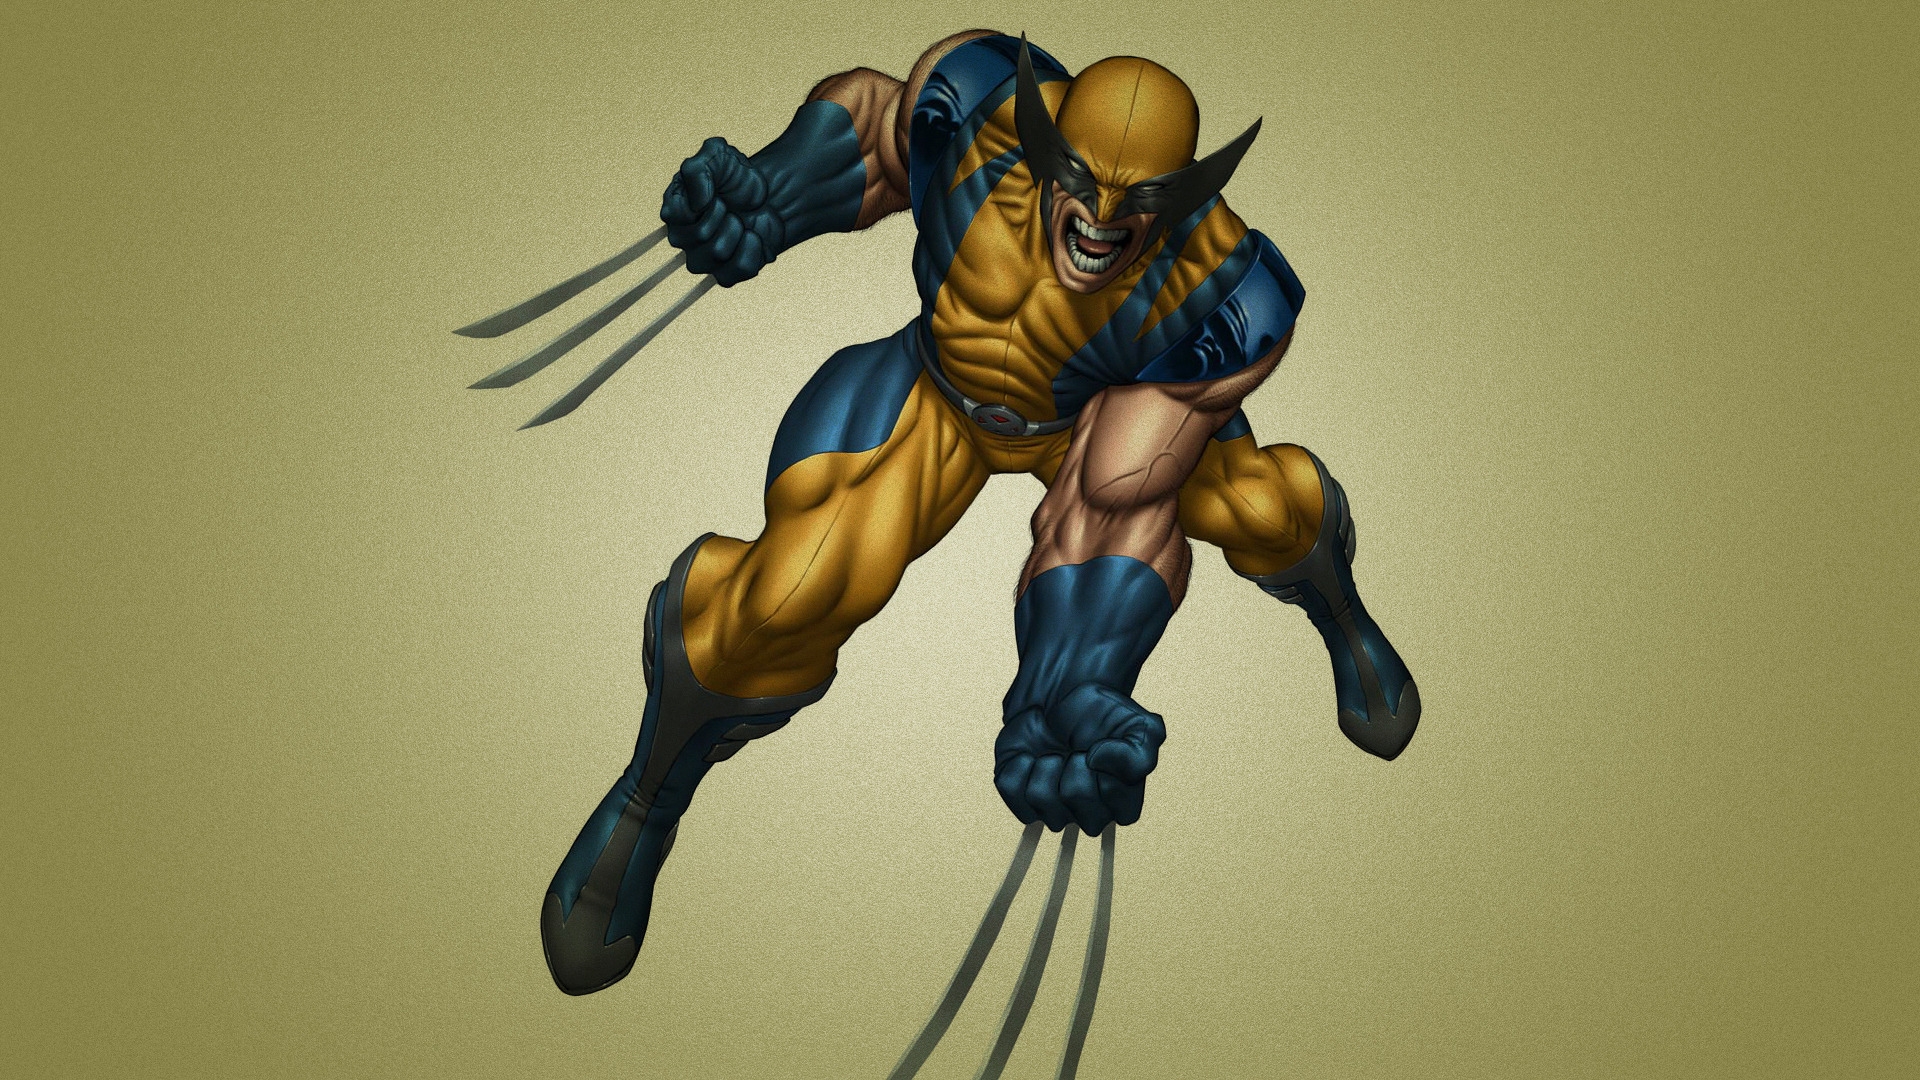 Wolverine Anime for 1920 x 1080 HDTV 1080p resolution